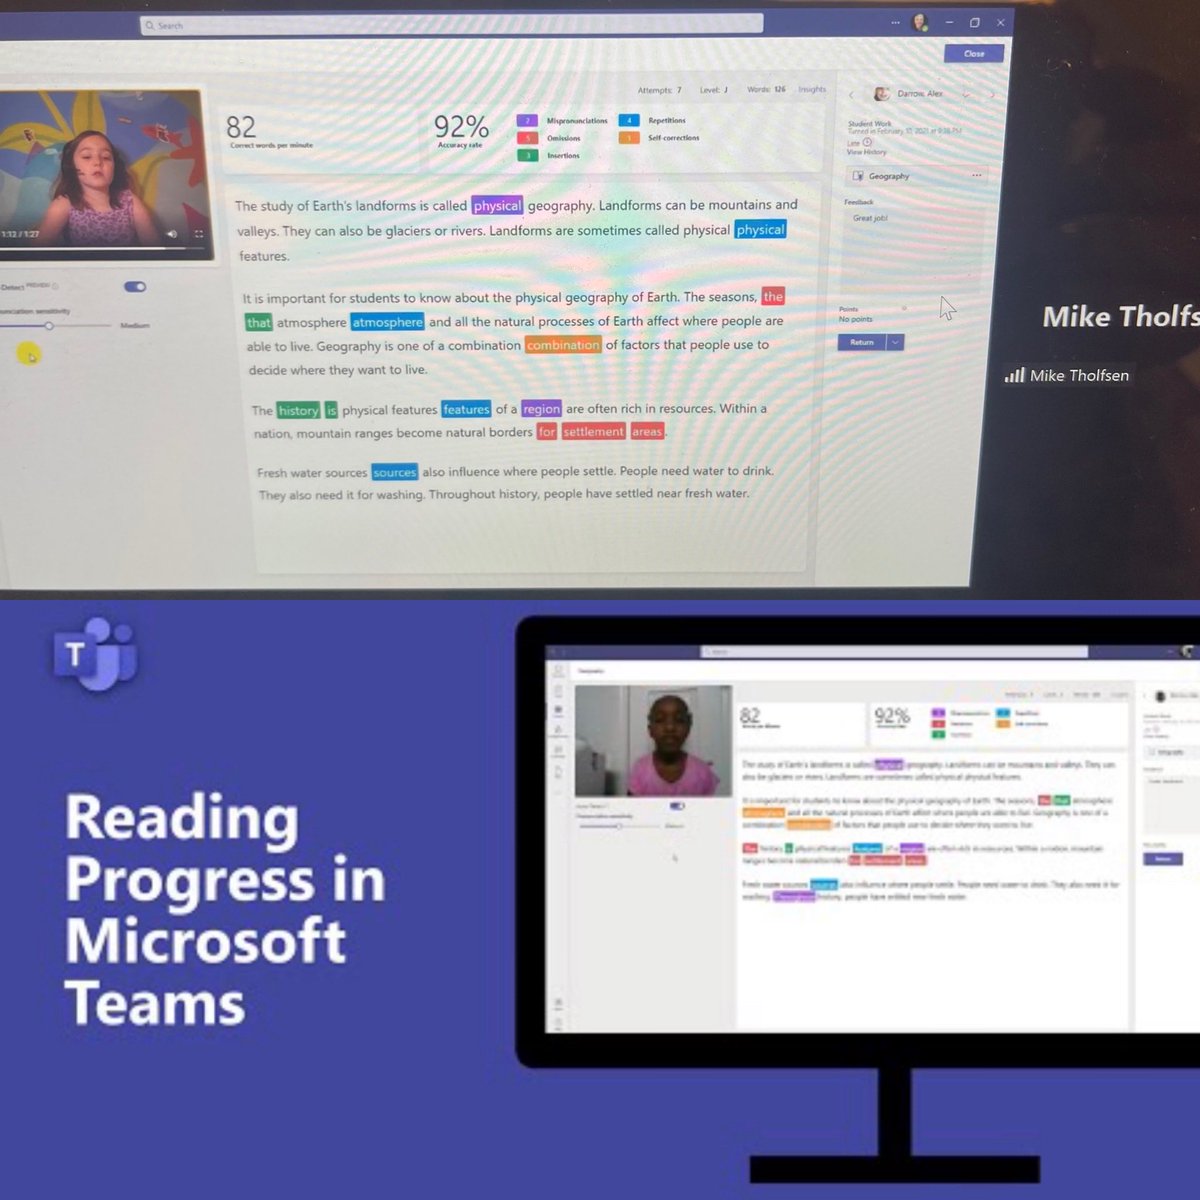 Just finished a presentation from ⁦@mtholfsen⁩ on Reading Progress-It’s Free👏🏽 in #MicrosoftTeams The data is so insightful & a time saver for teachers. Best part is students ❤️ it. Best tool out there! @⁦APSInstructTech⁩ @MicrosoftEDU⁩ ⁦@mbpcaps⁩